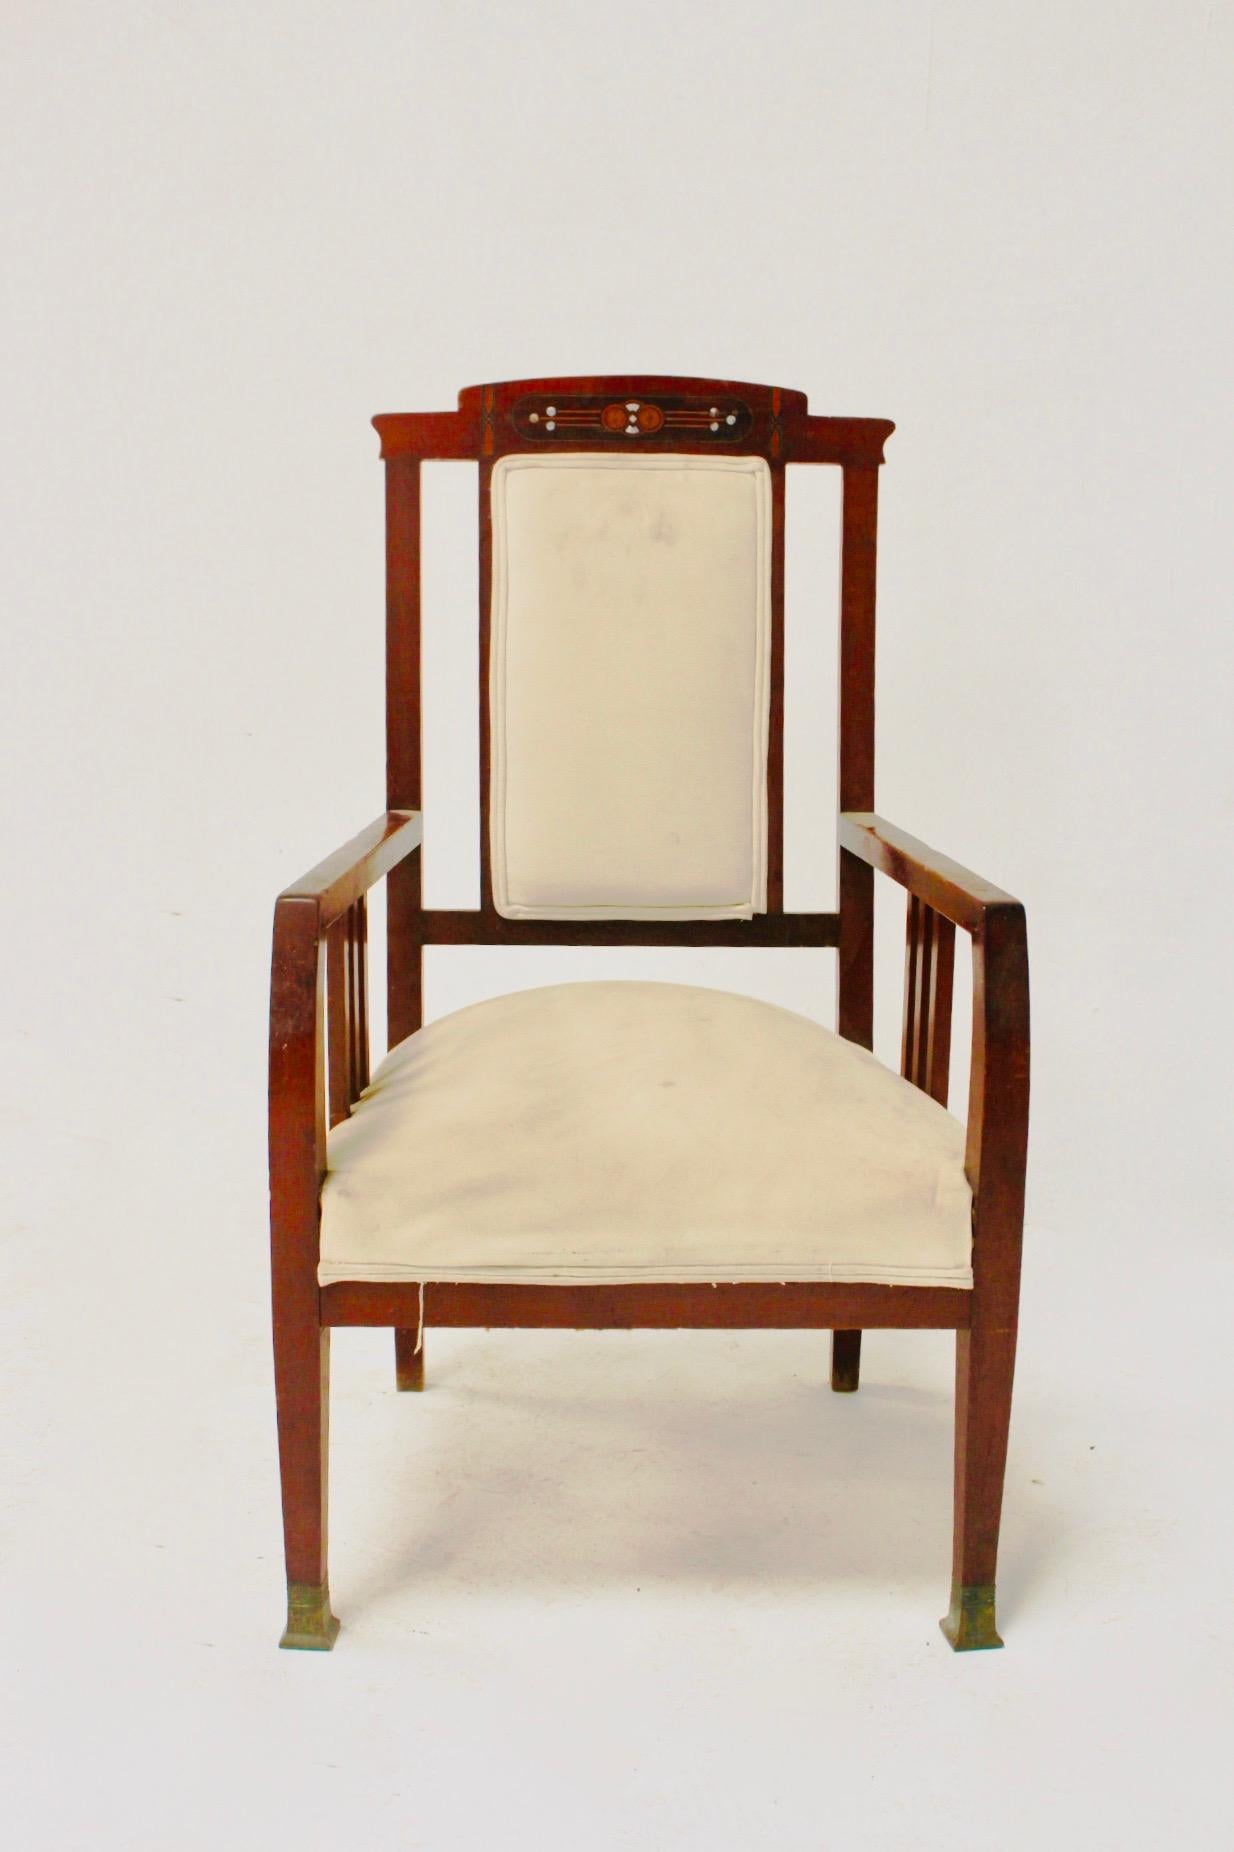 Art Nouveau or Spanish modernist mahogany wood armchair, Spain, late 19th century.
Wood and structure are in very good condition.
- With inlay mother of pearl
- Brass accents at the feet with old Patina.

Fabric in distressed condition.
 